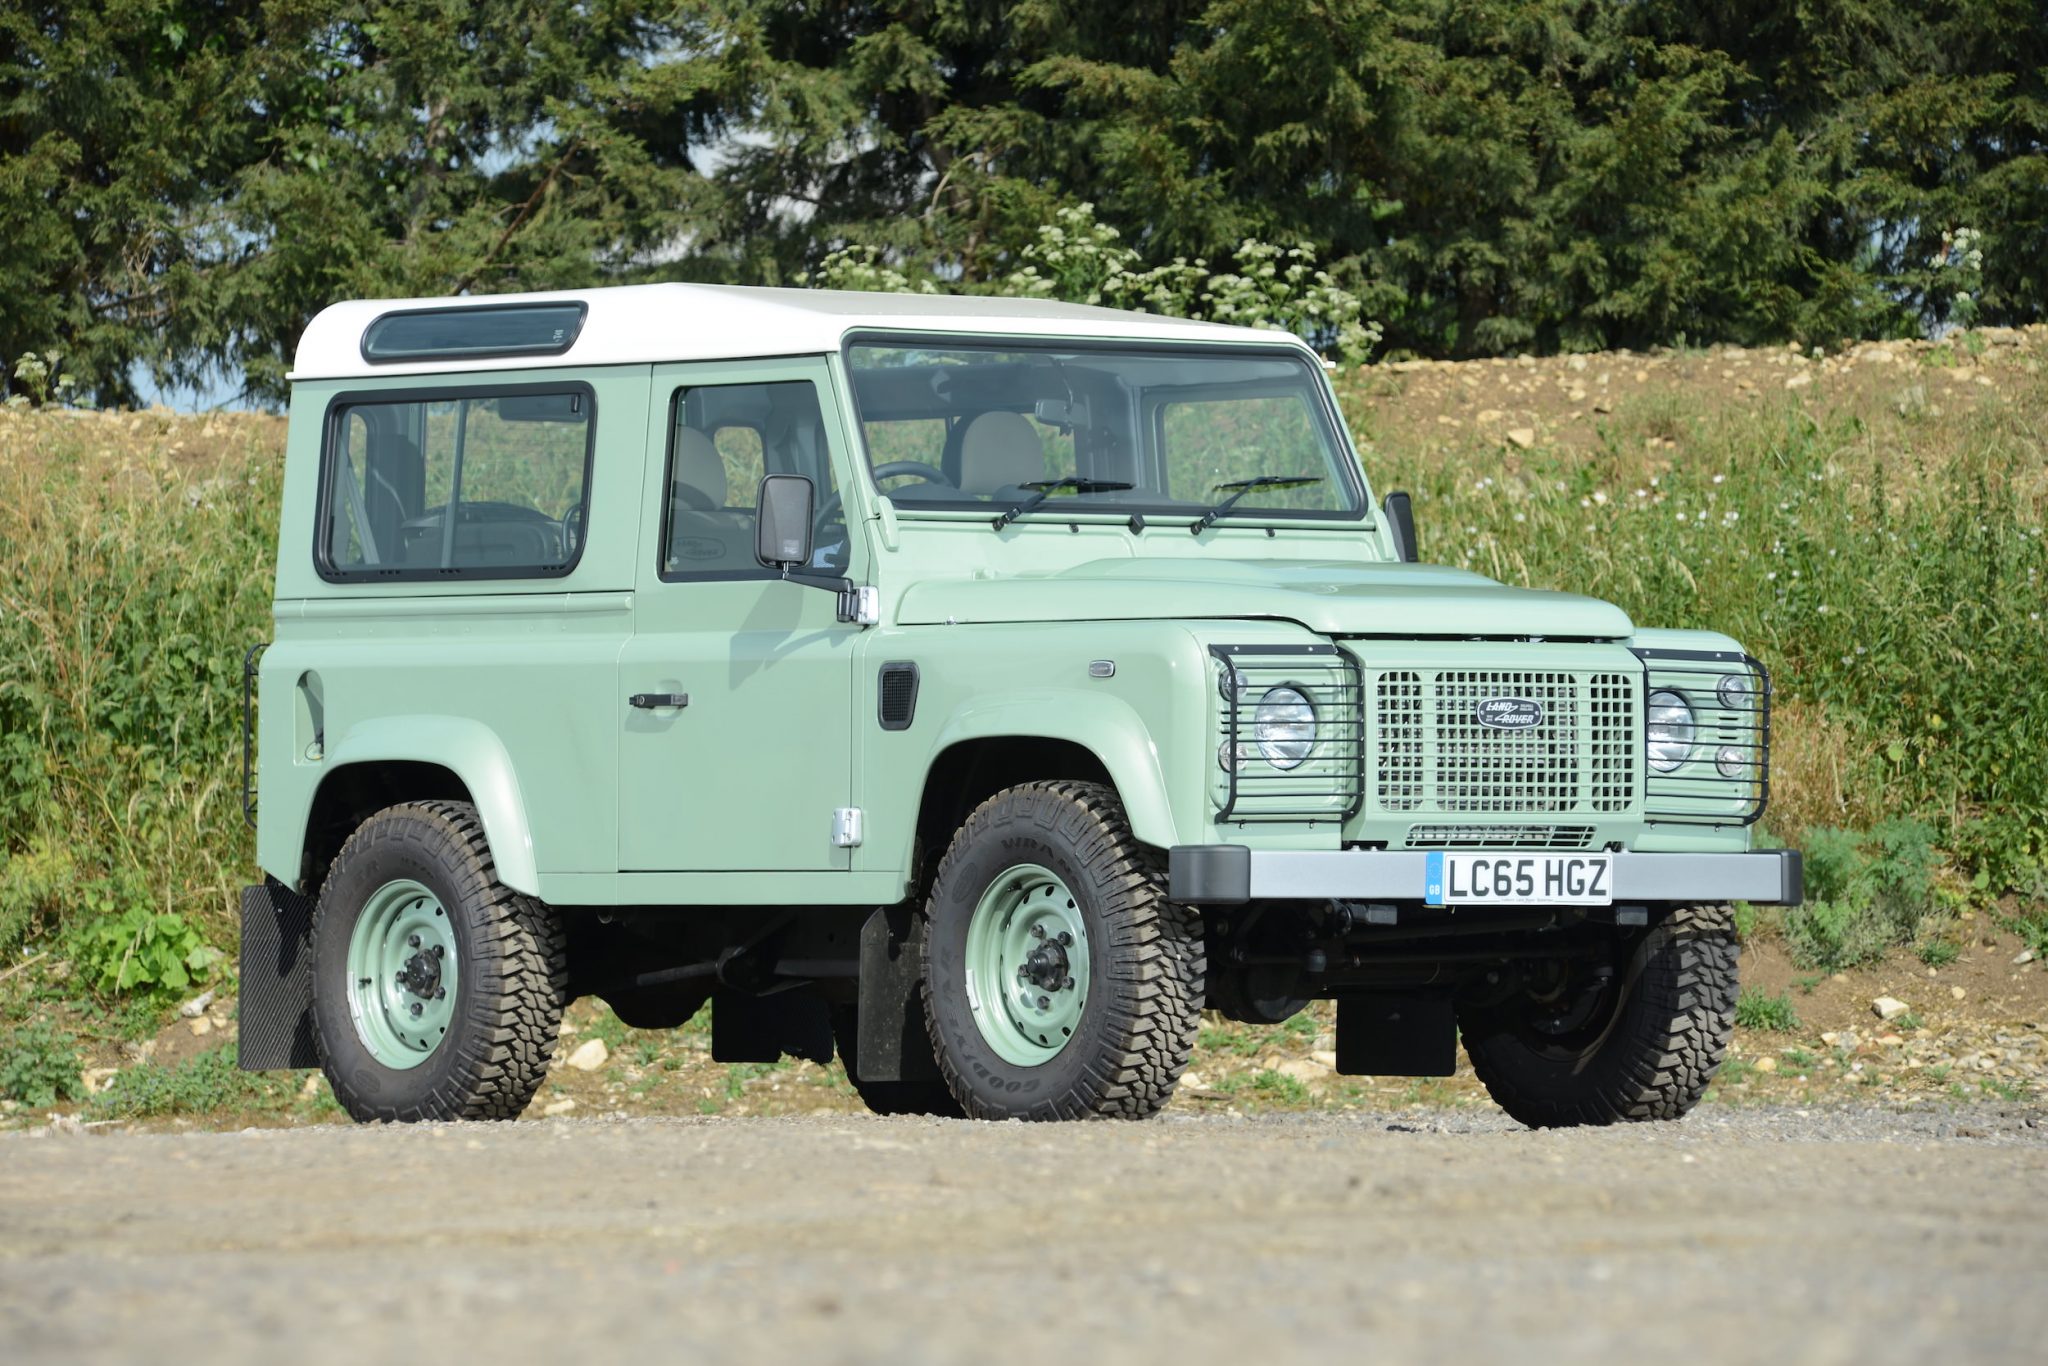 The History of the Land Rover Defender